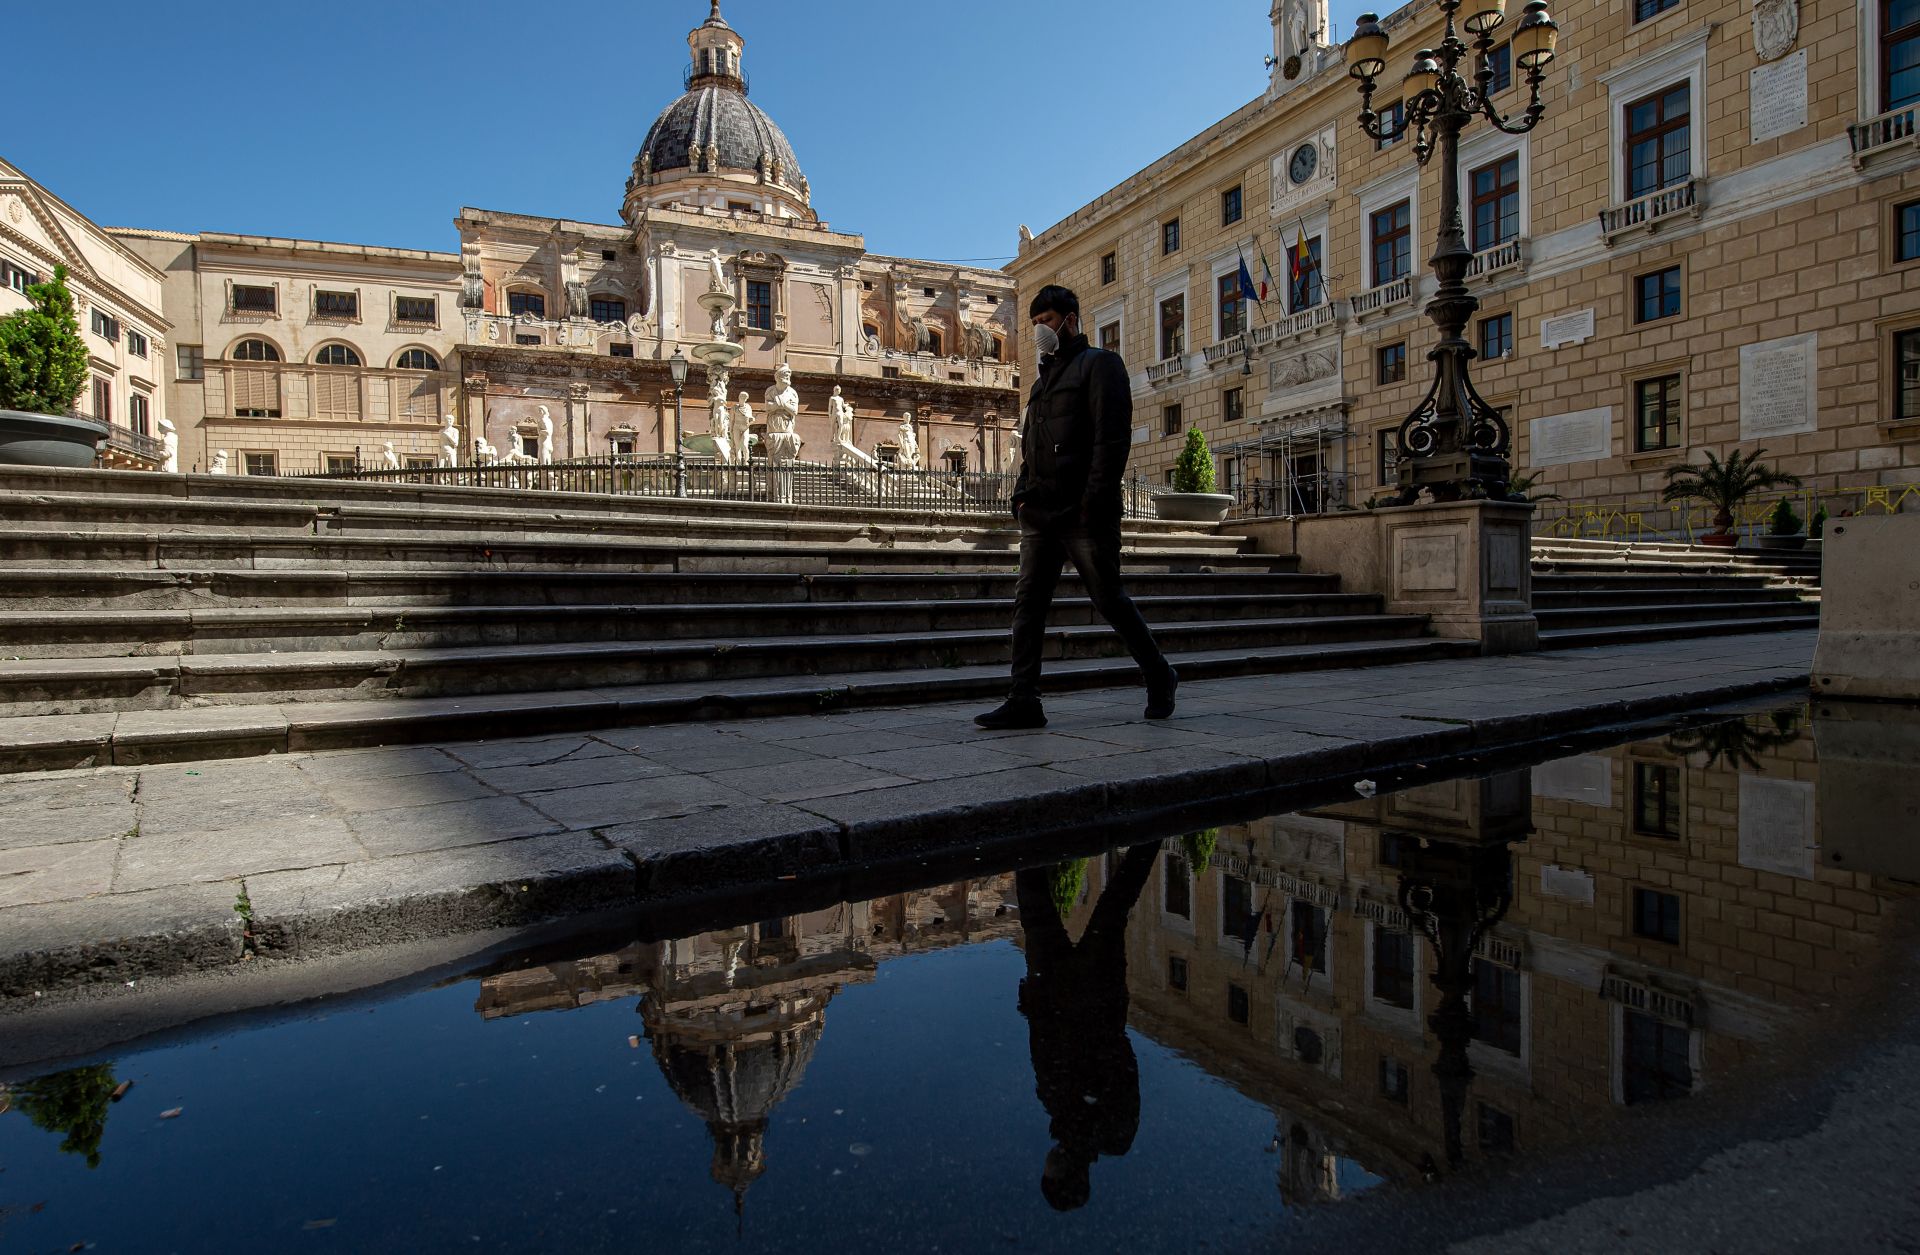 A man wearing a face mask walks in Pretoria square in Palermo, Italy, on March 11, 2020.